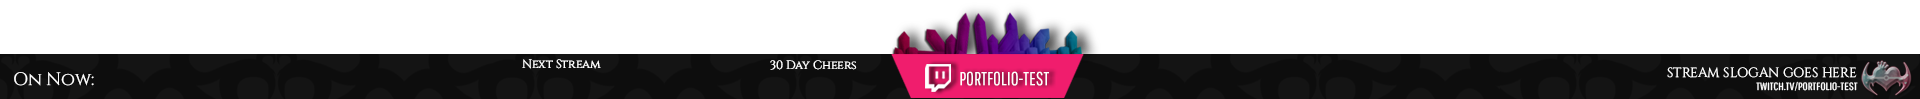 Graphic that is a bottom banner for a video feed while a stream is live. The banner is mostly dark charchoal, with a pink cutout in the middle that says "Portfolio-Test" and crystal cluster above it. It has sections on the left for "On Now" "Next Stream" and "30 Day Cheers", and on the right it shows a logo image and says "Stream Slogan Goes Here" with the direct stream link.